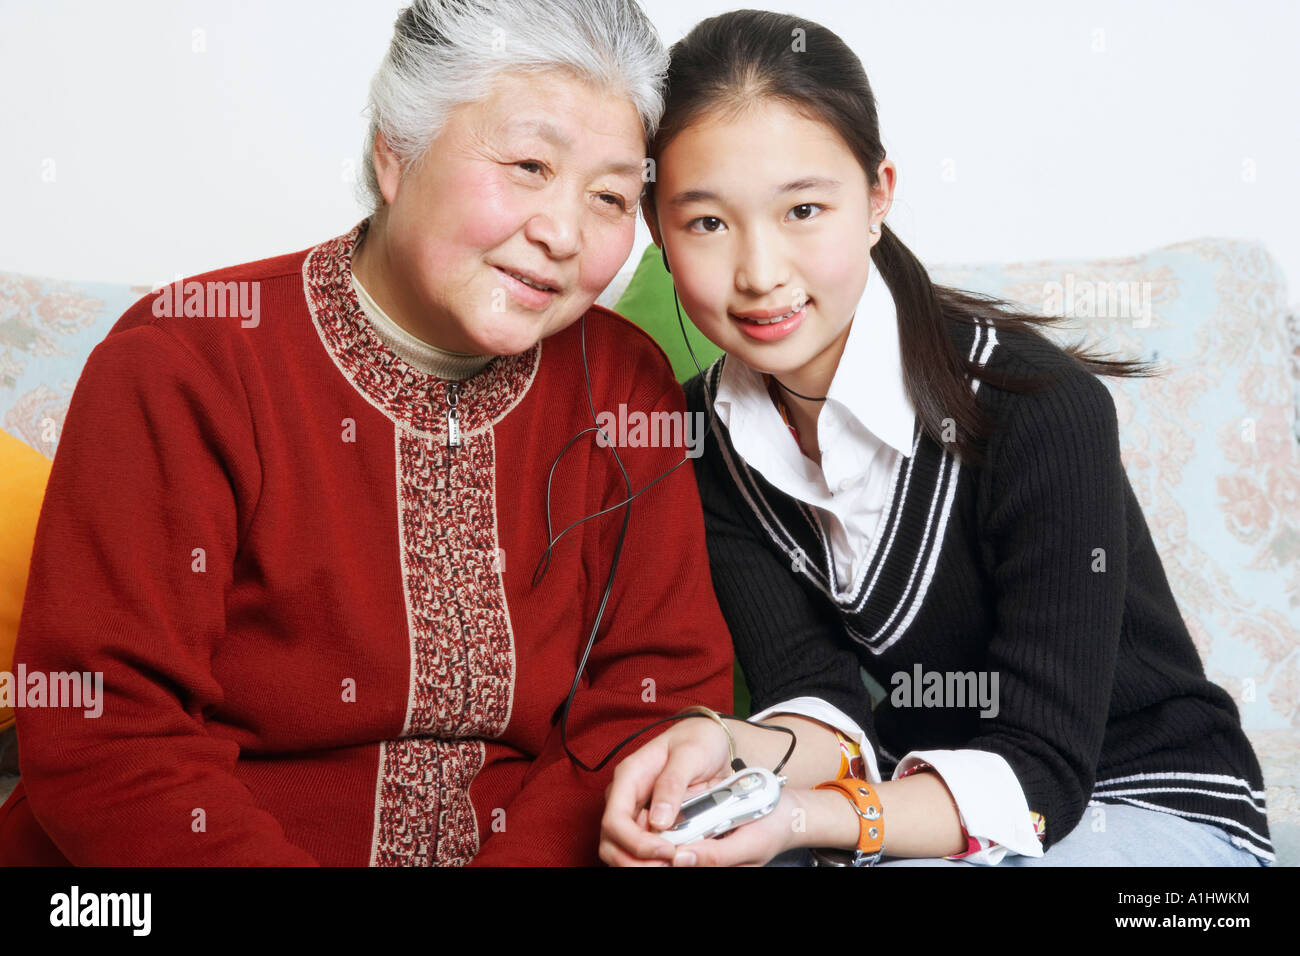 Portrait of a young woman sharing headphones with her grandmother Stock Photo